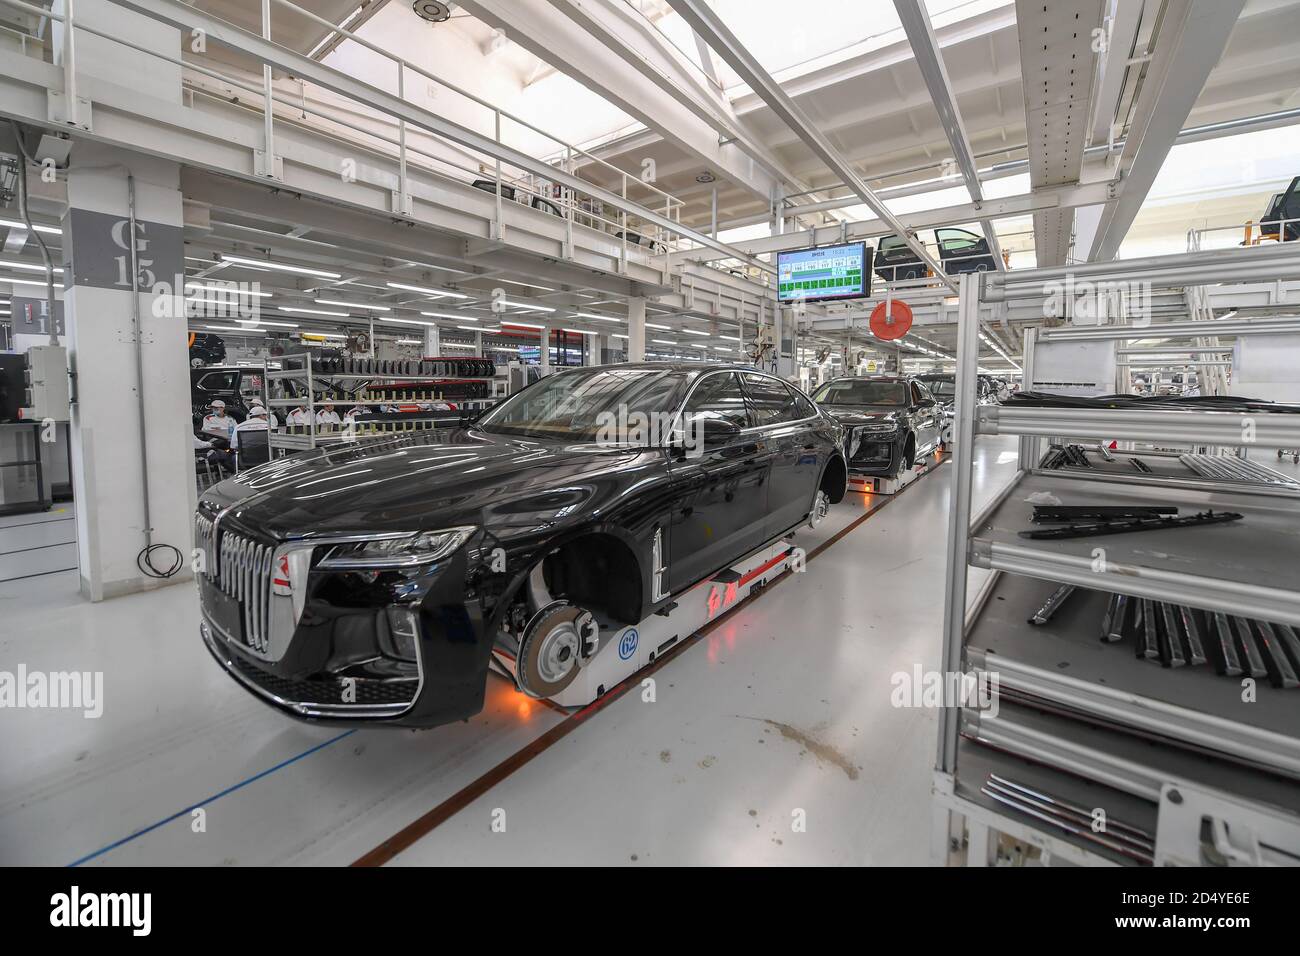 Changchun, China's Jilin Province. 23rd Sep, 2020. Cars wait for assembling at a factory of the First Automotive Works (FAW) Group Co., Ltd. in Changchun, capital of northeast China's Jilin Province, Sept. 23, 2020. China's leading automaker First Automotive Works (FAW) Group Co., Ltd. sold 2,656,744 vehicles in the first three quarters of the year, up 8 percent year on year, according to corporate sources. Credit: Zhang Nan/Xinhua/Alamy Live News Stock Photo